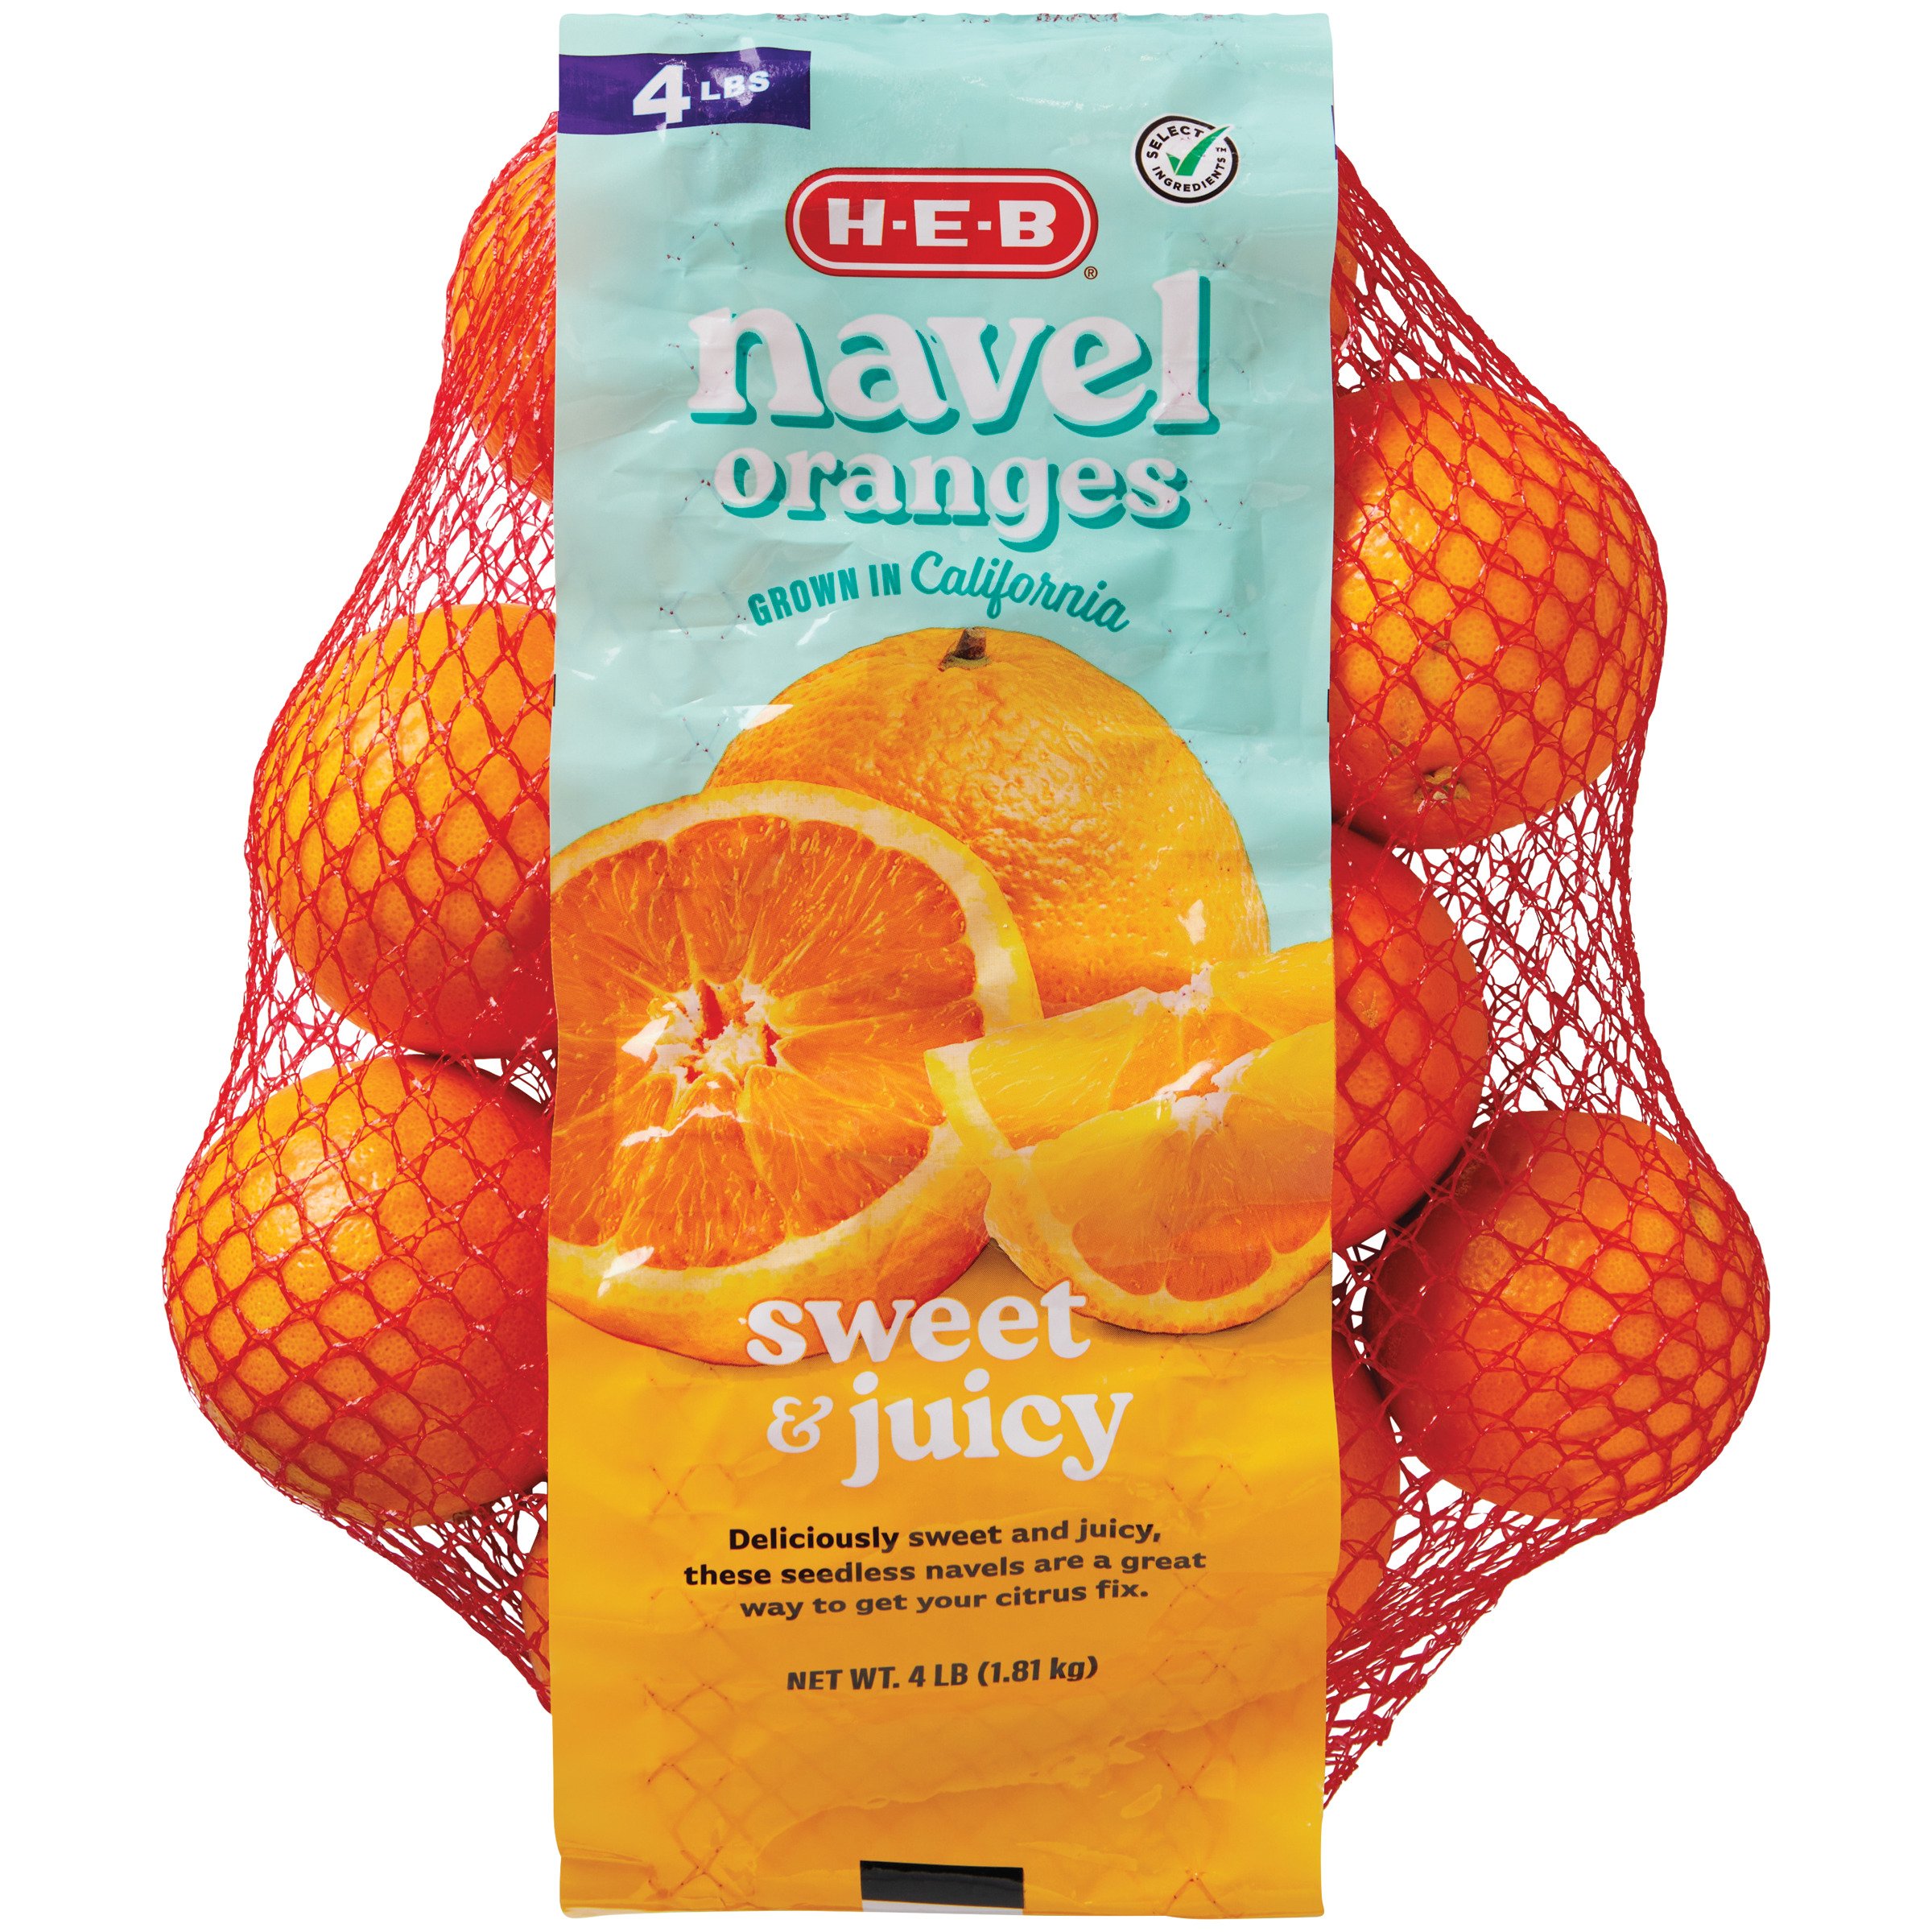 https://images.heb.com/is/image/HEBGrocery/008728504-1